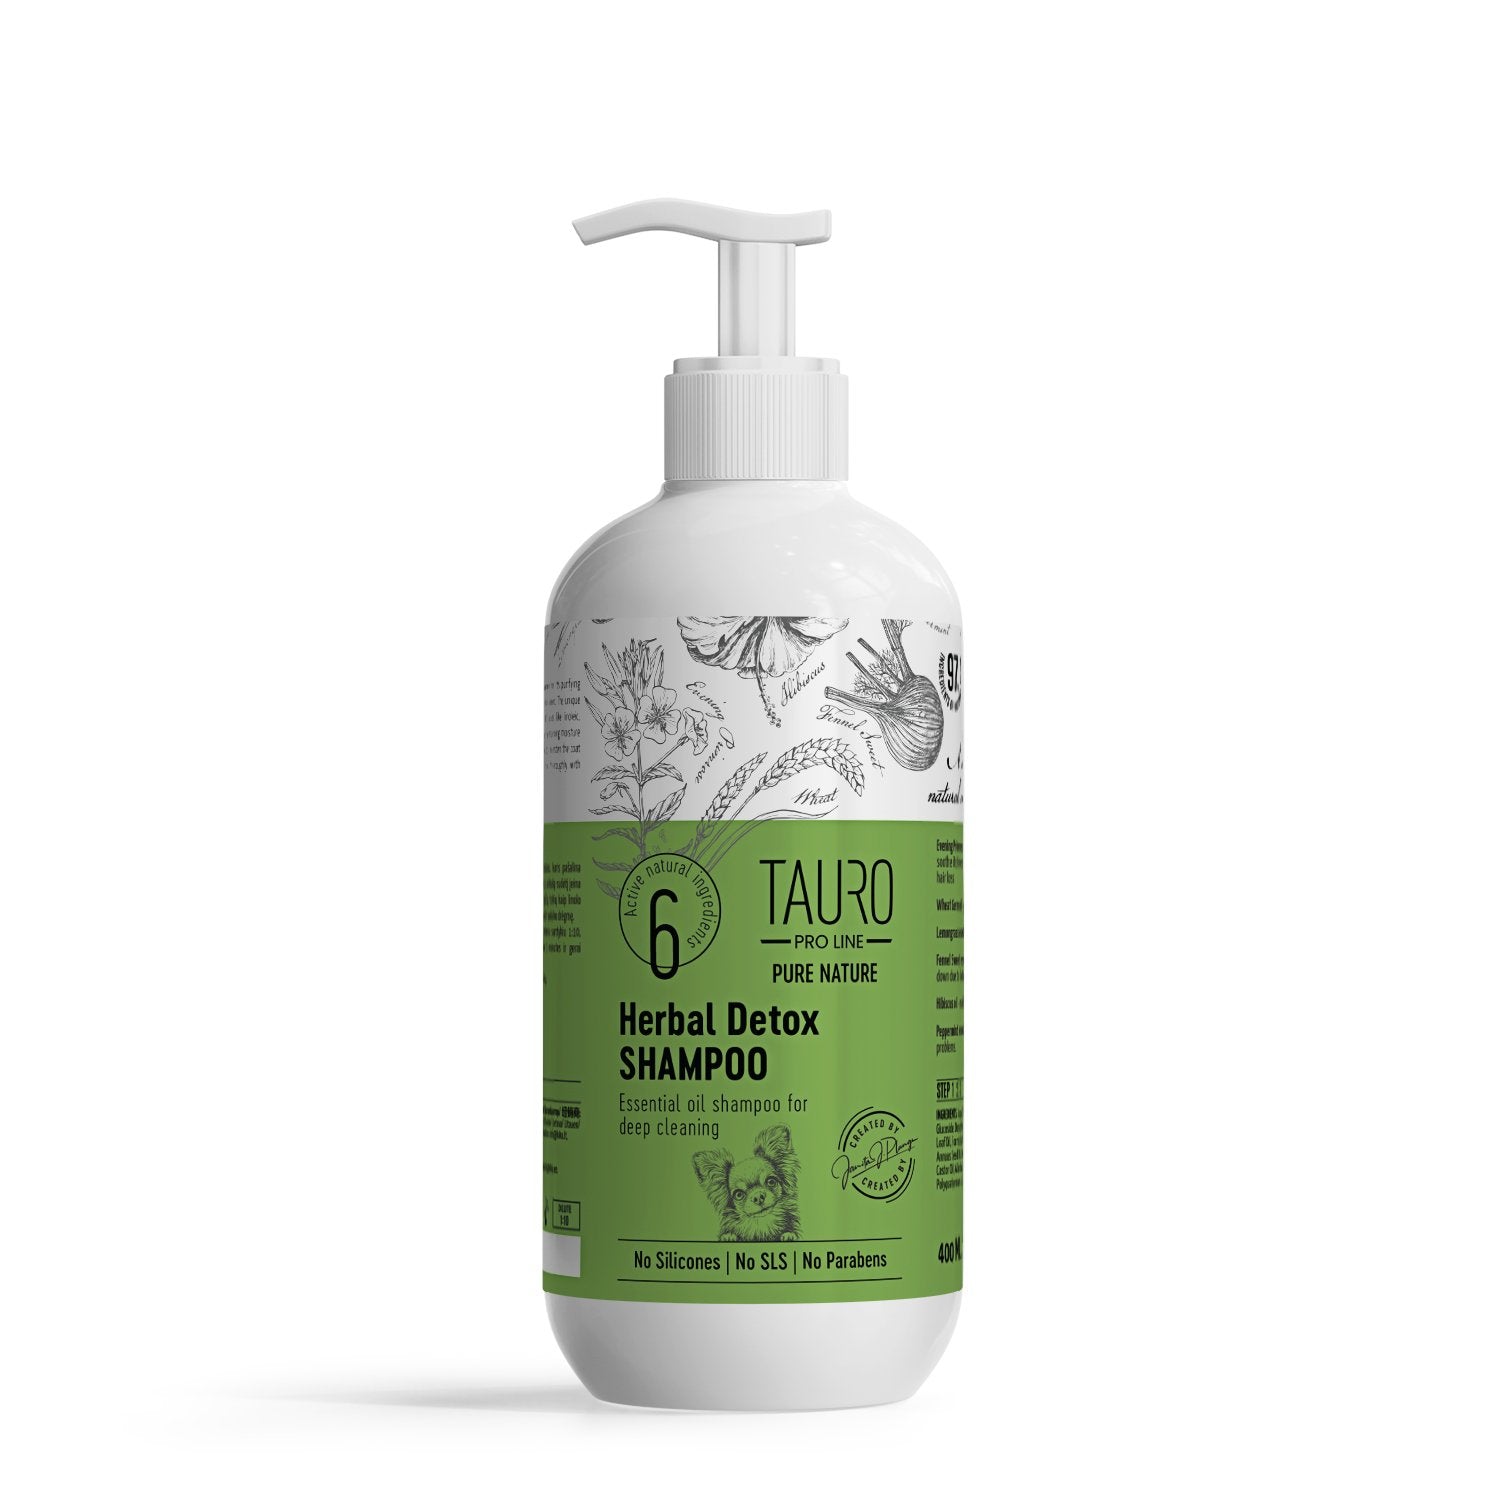 online Tauro from brand, Line favorite Shampoo: Pro Tauro Buy your shampoo Line Pro